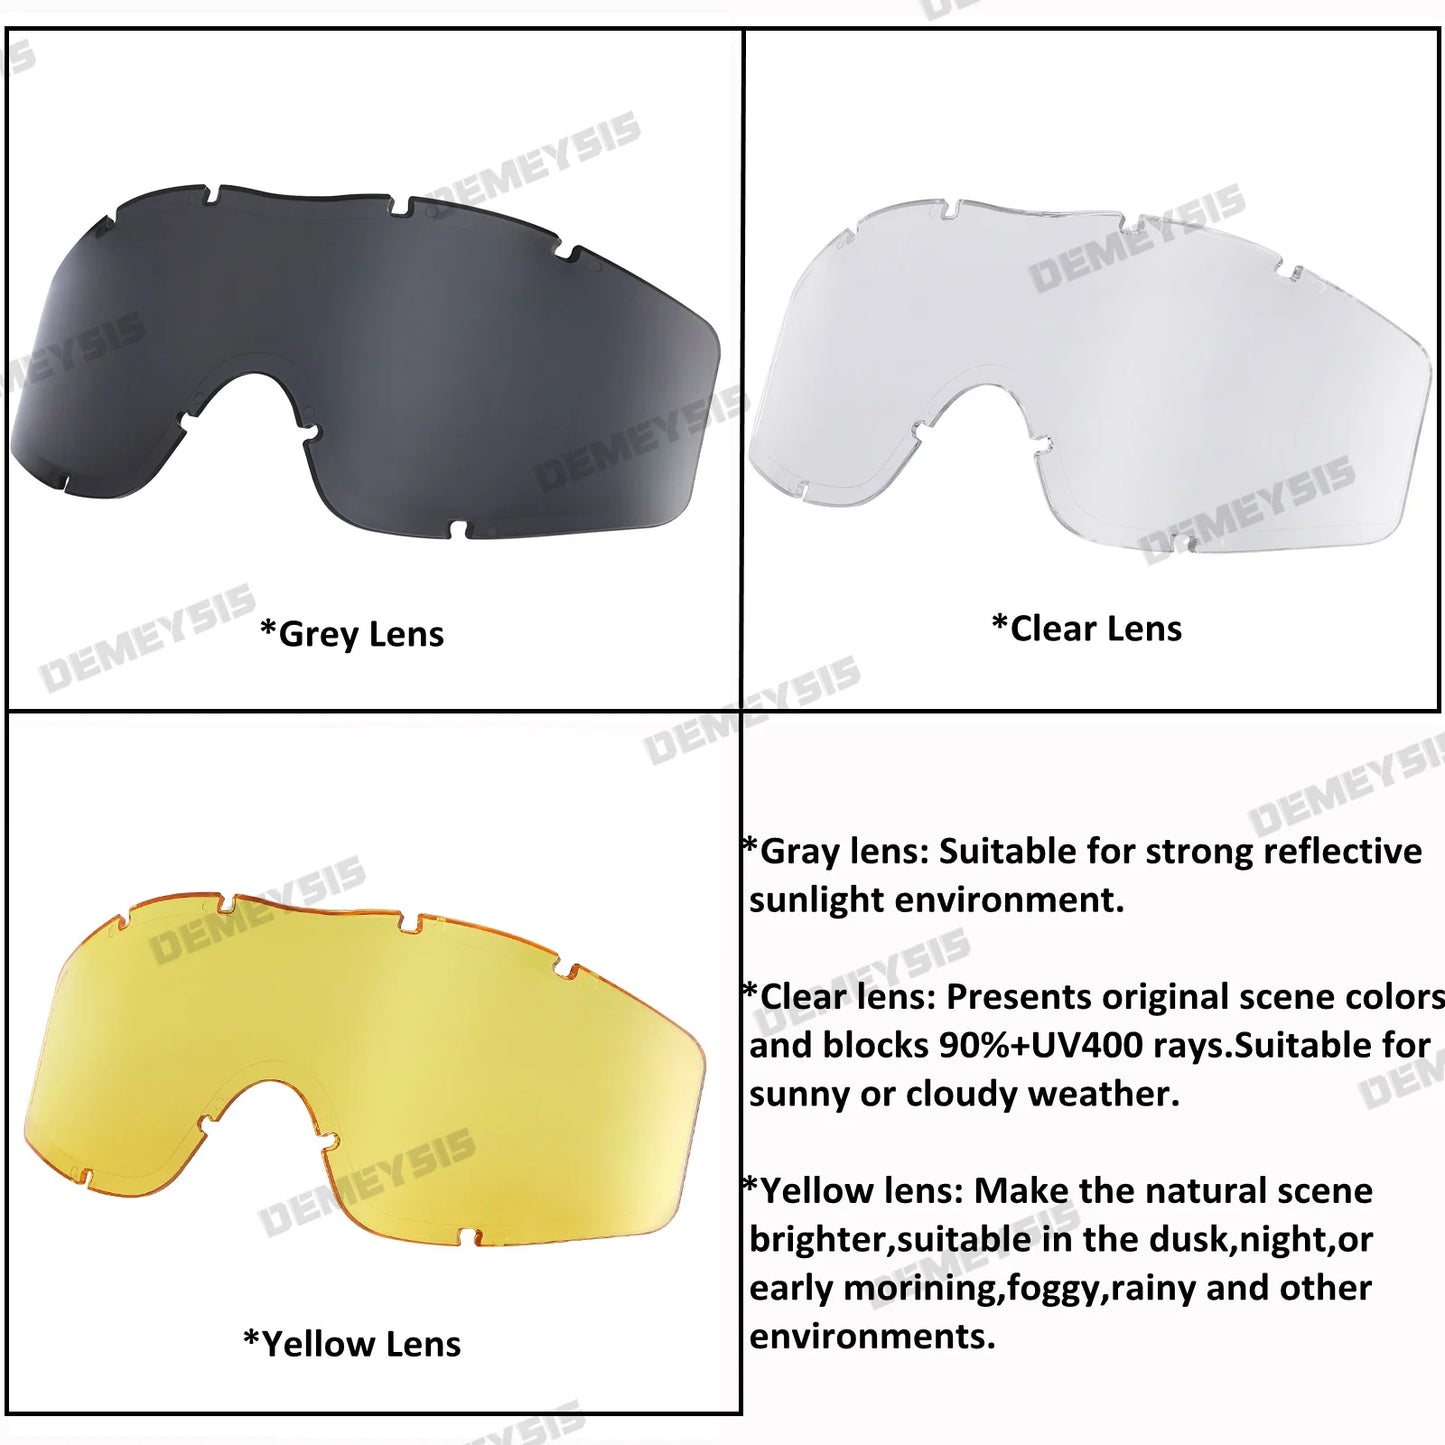 Military Tactical Goggles Shooting Glasses